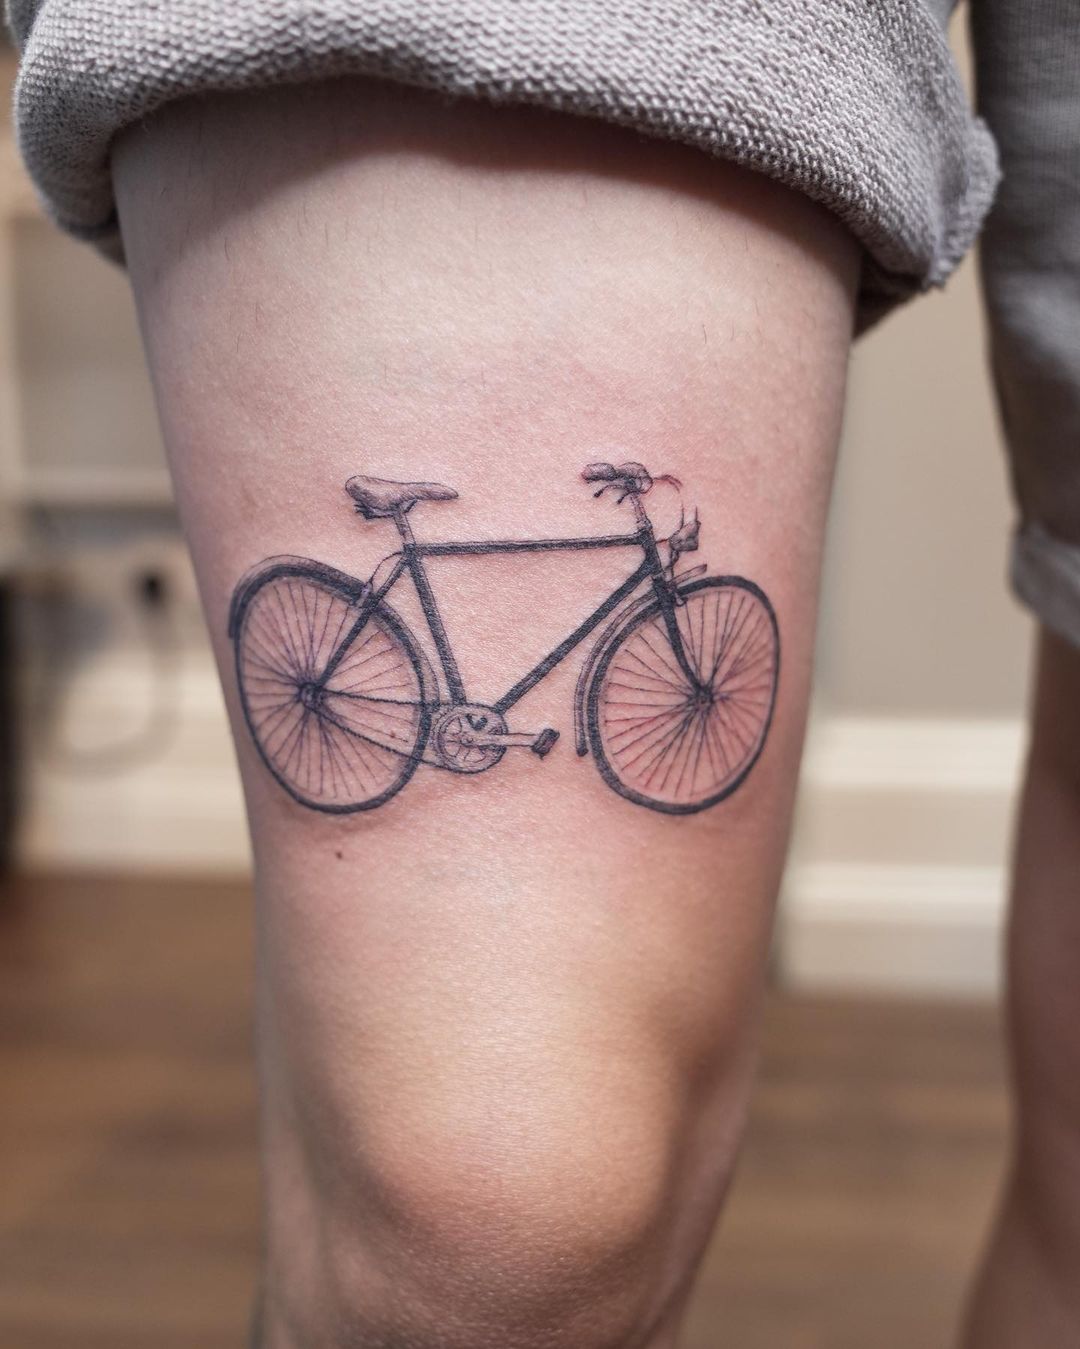 Bicycle Tattoo Ideas Extensive Collection Of Images Of Awesome And Unique Bicycle  Tattoos Traditional Bicycle Tattoo by Miguelina LaMarsh  Goodreads